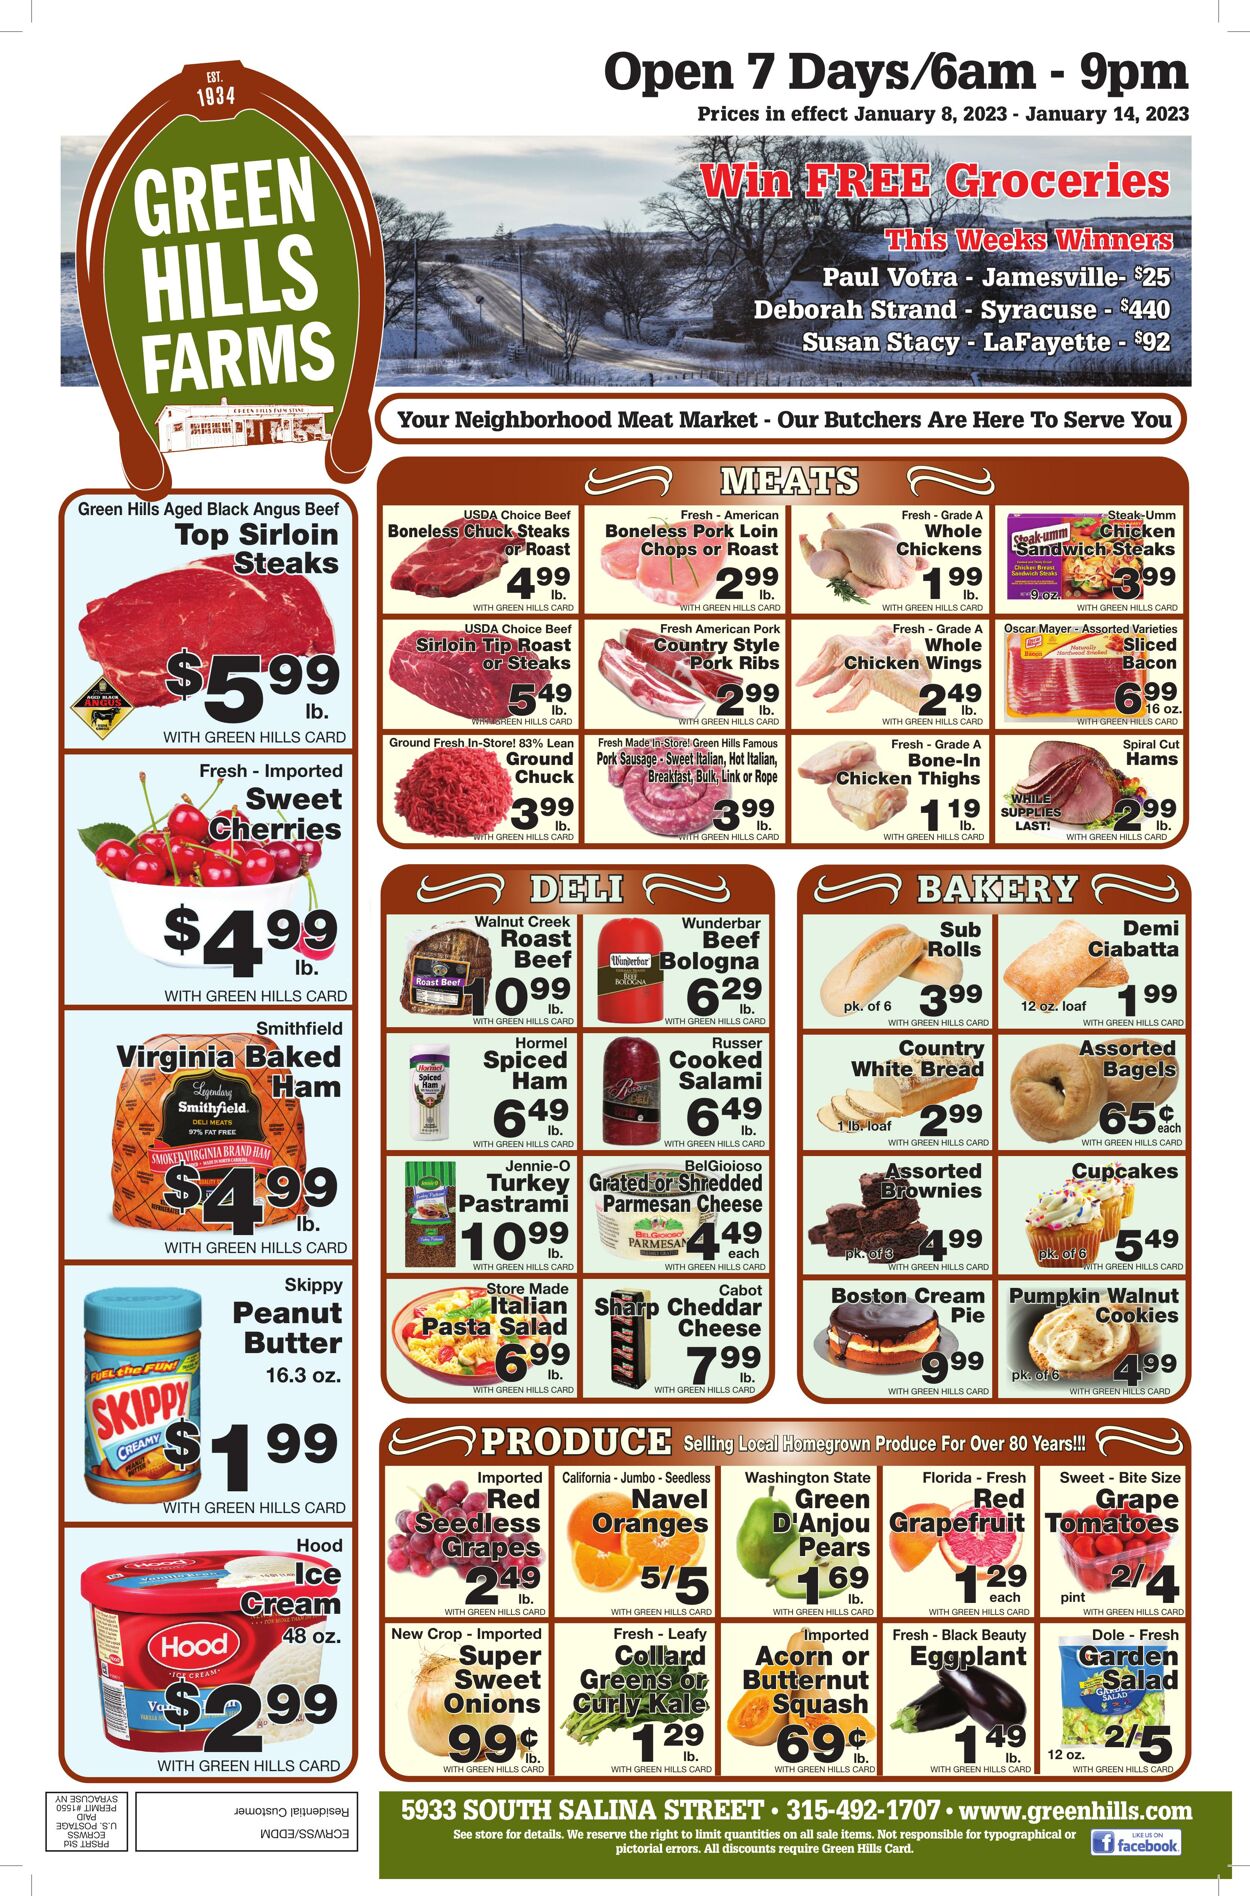 Weekly ad Green Hills Farms 01/08/2023 - 01/14/2023